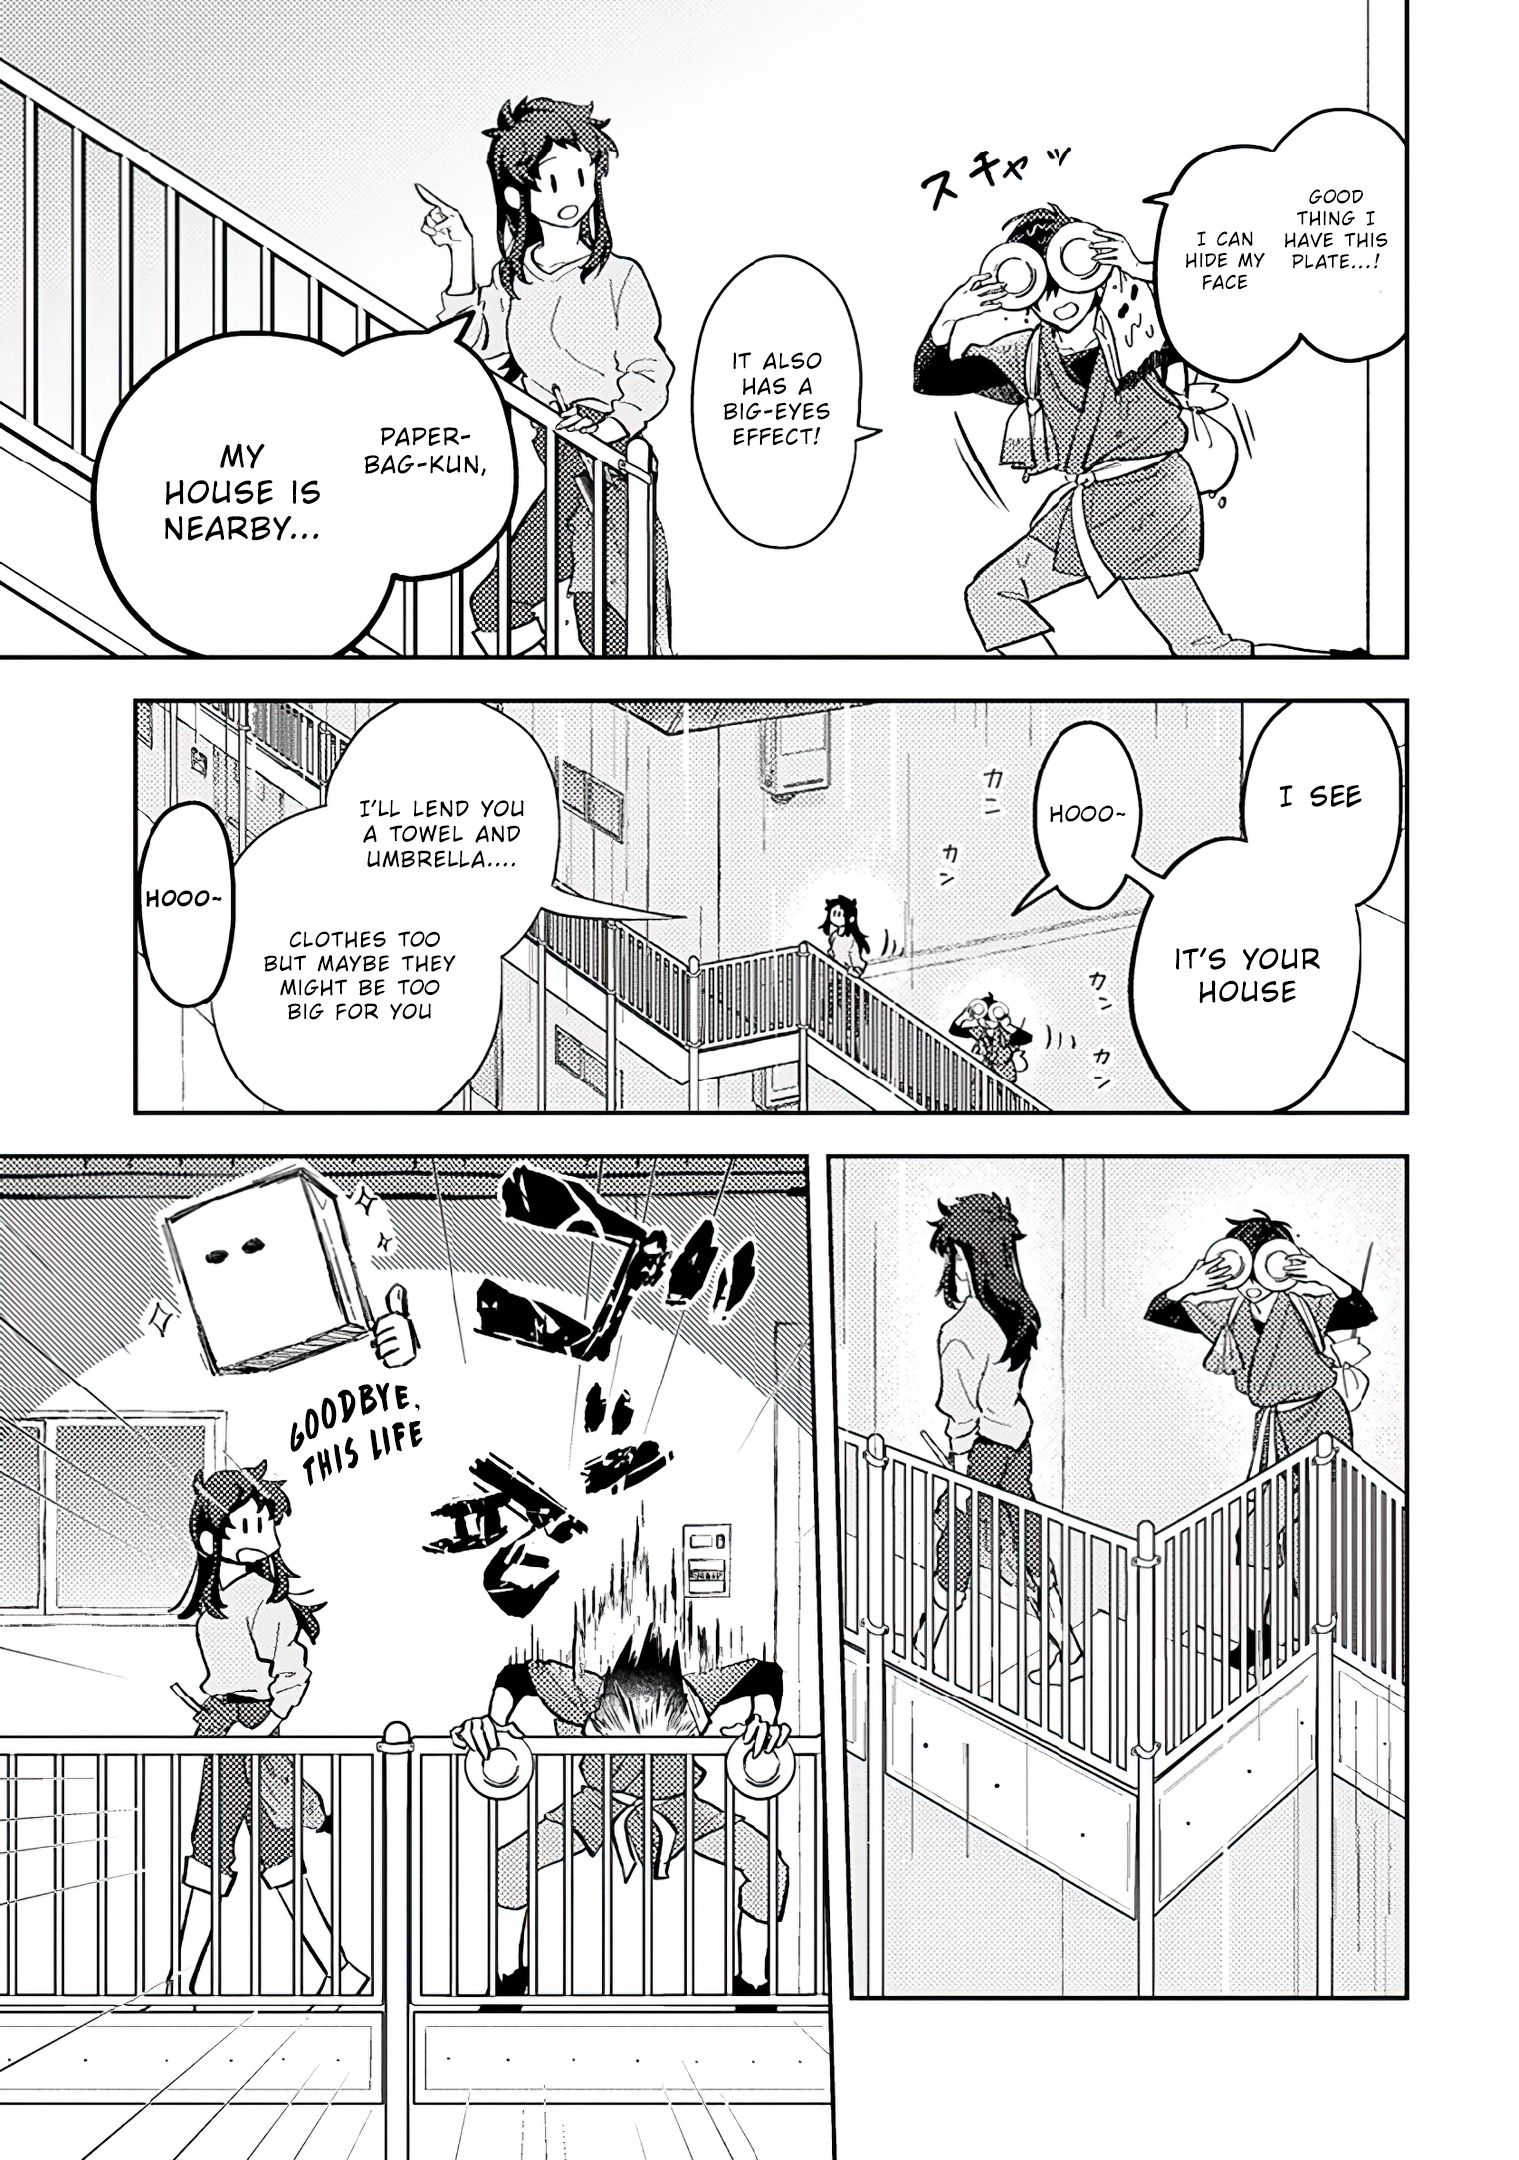 Paperbag-Kun Is In Love - chapter 7 - #6